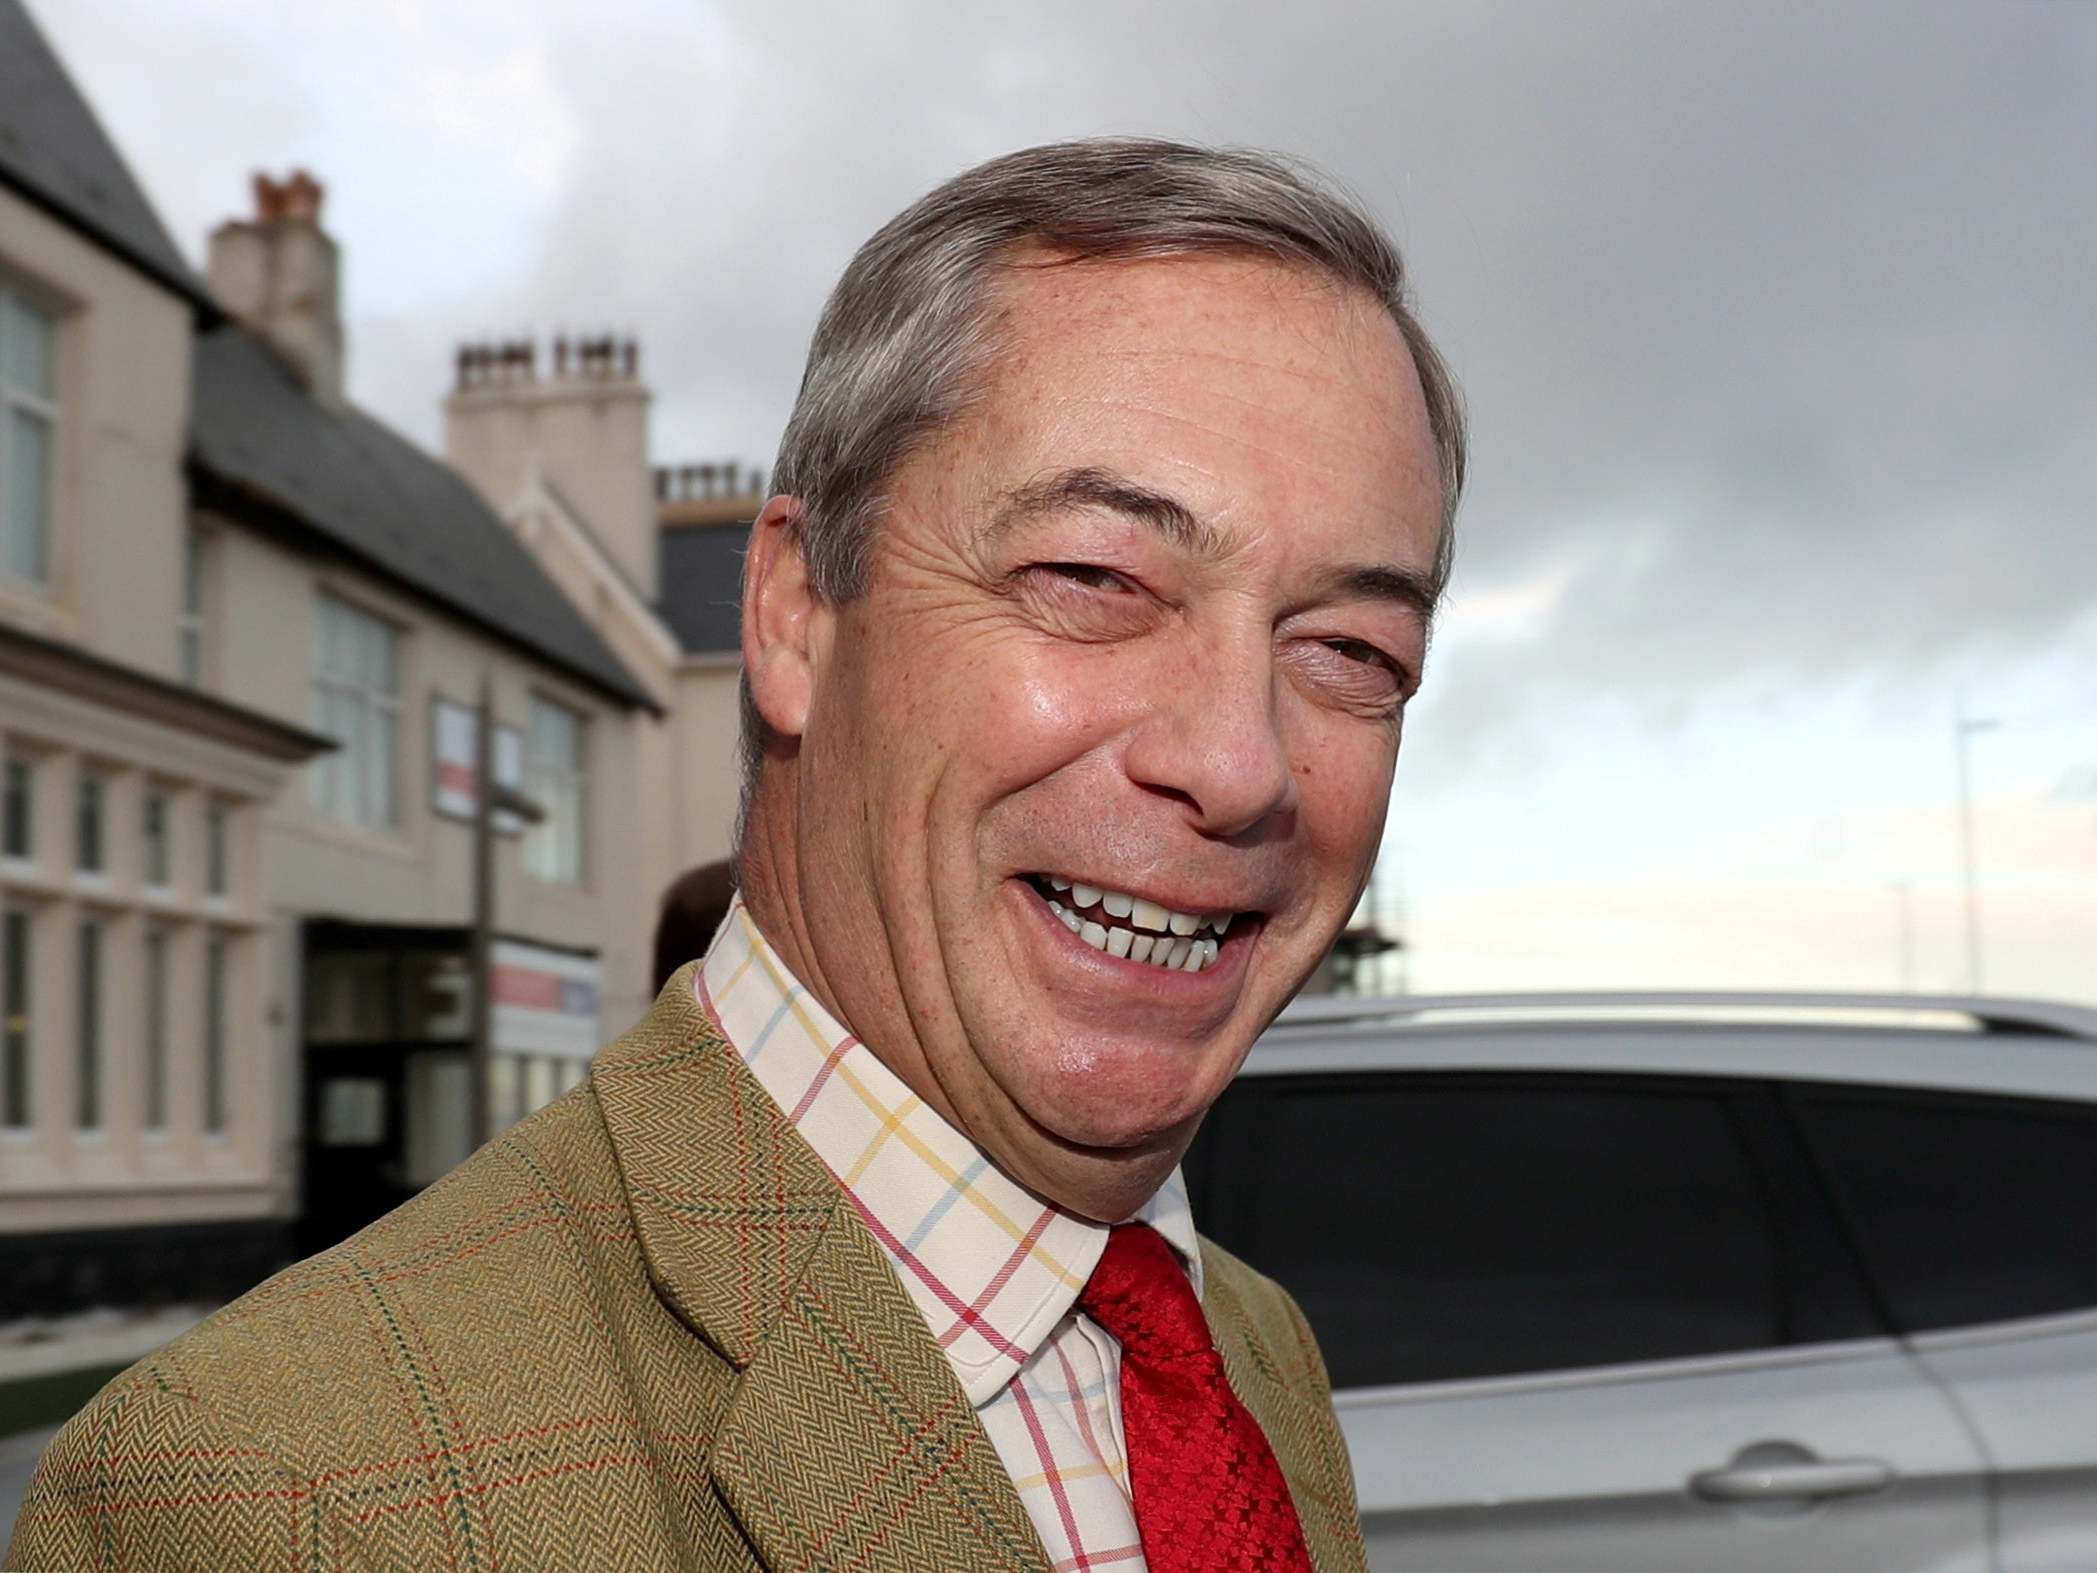 Farage is planning a £100,000 ‘celebration’ in Parliament Square